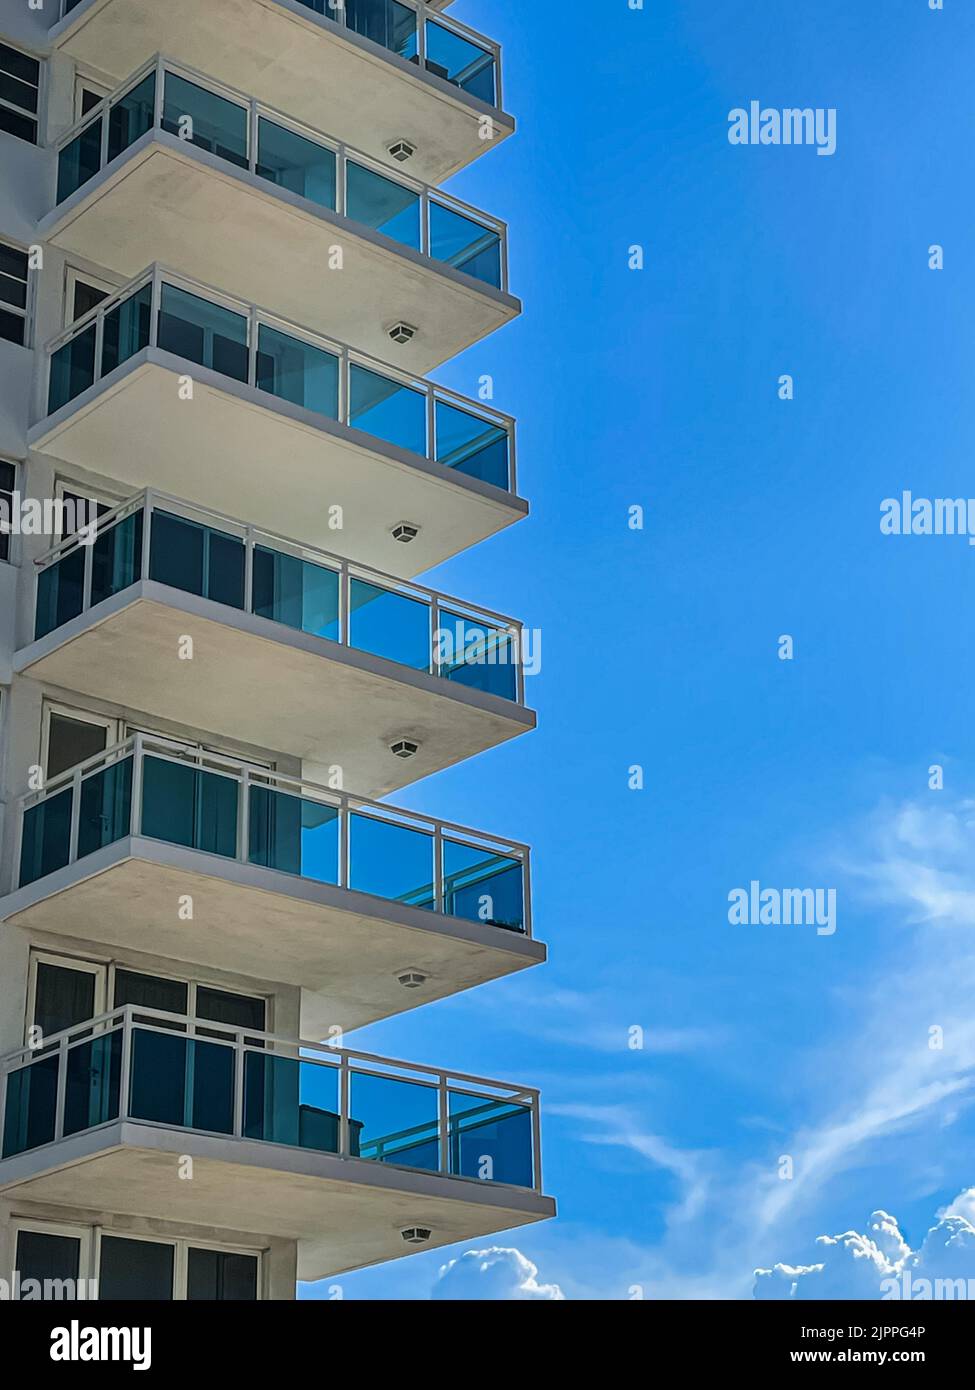 High Rise condo patios are stacked on top of each other against a South Florida cobalt blue sky. Stock Photo